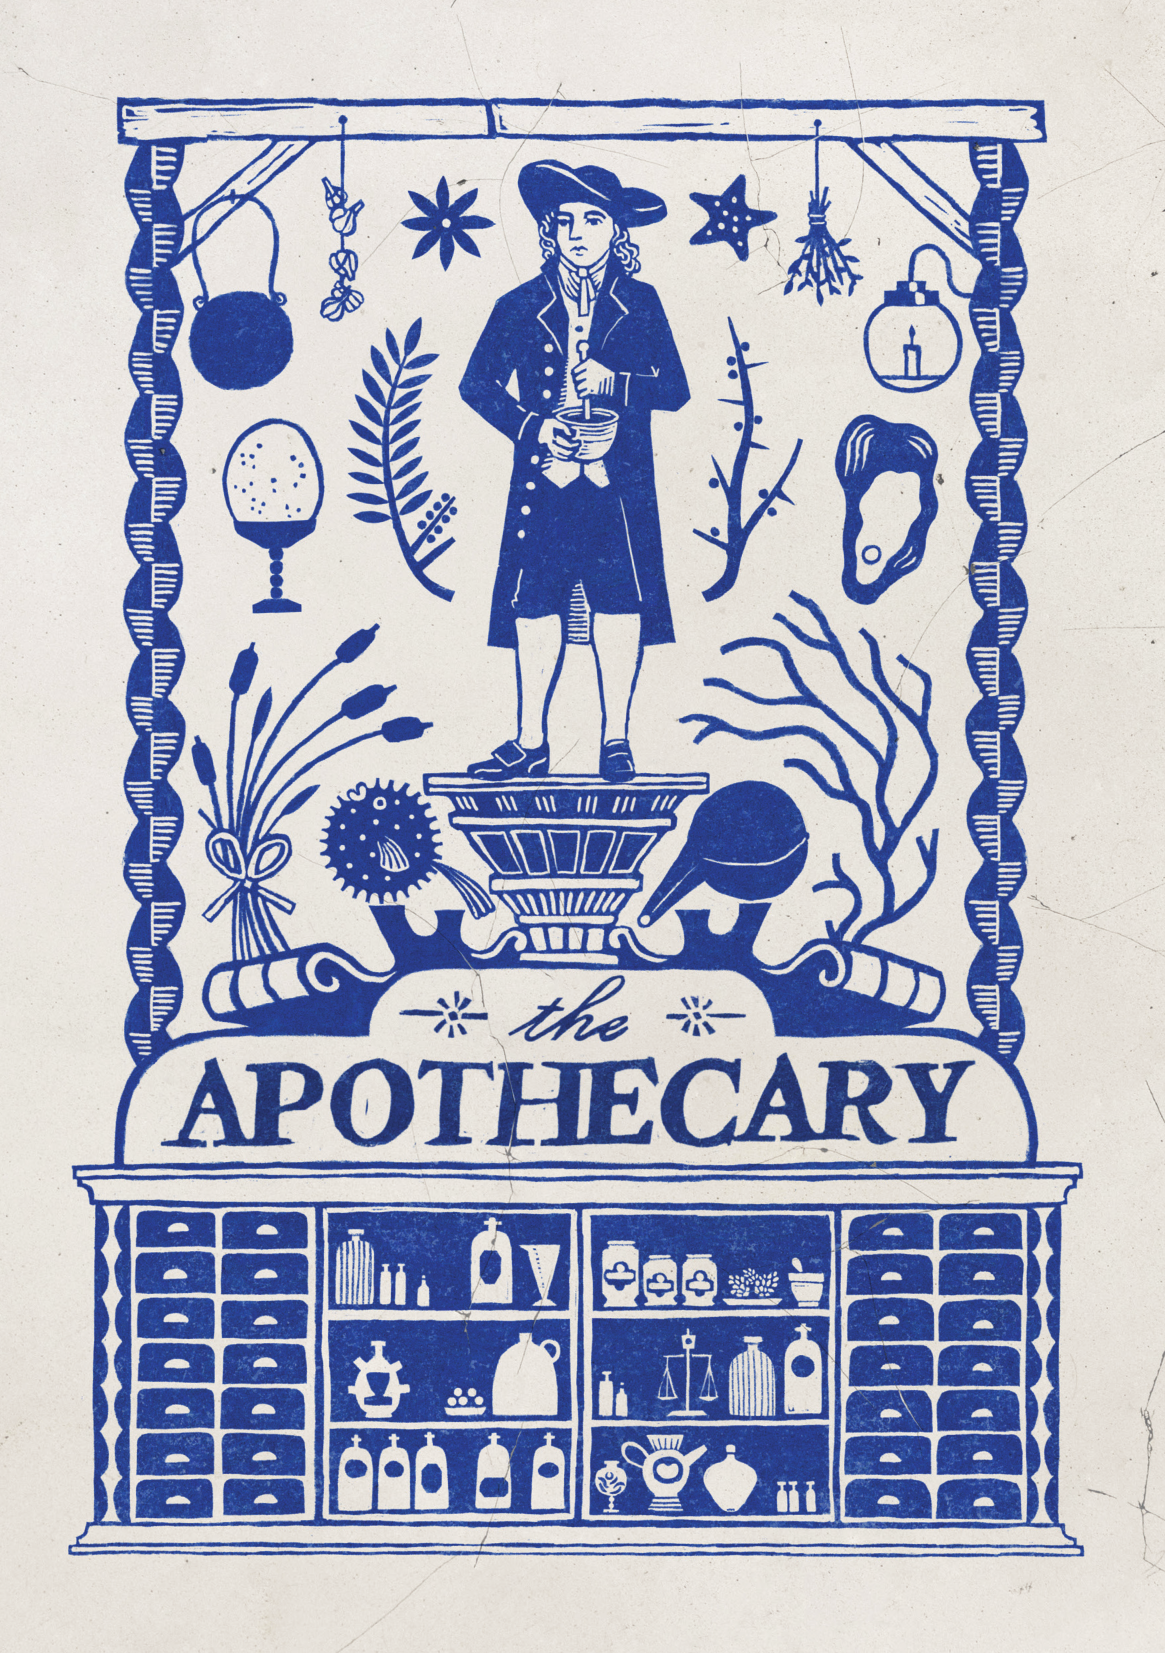 A blue and white design with an apothecary standing centrally holding a pestle and mortar, surrounded by objects from the museum; across the bottom of the page are drawers and shelves of apothecary bottles and jars